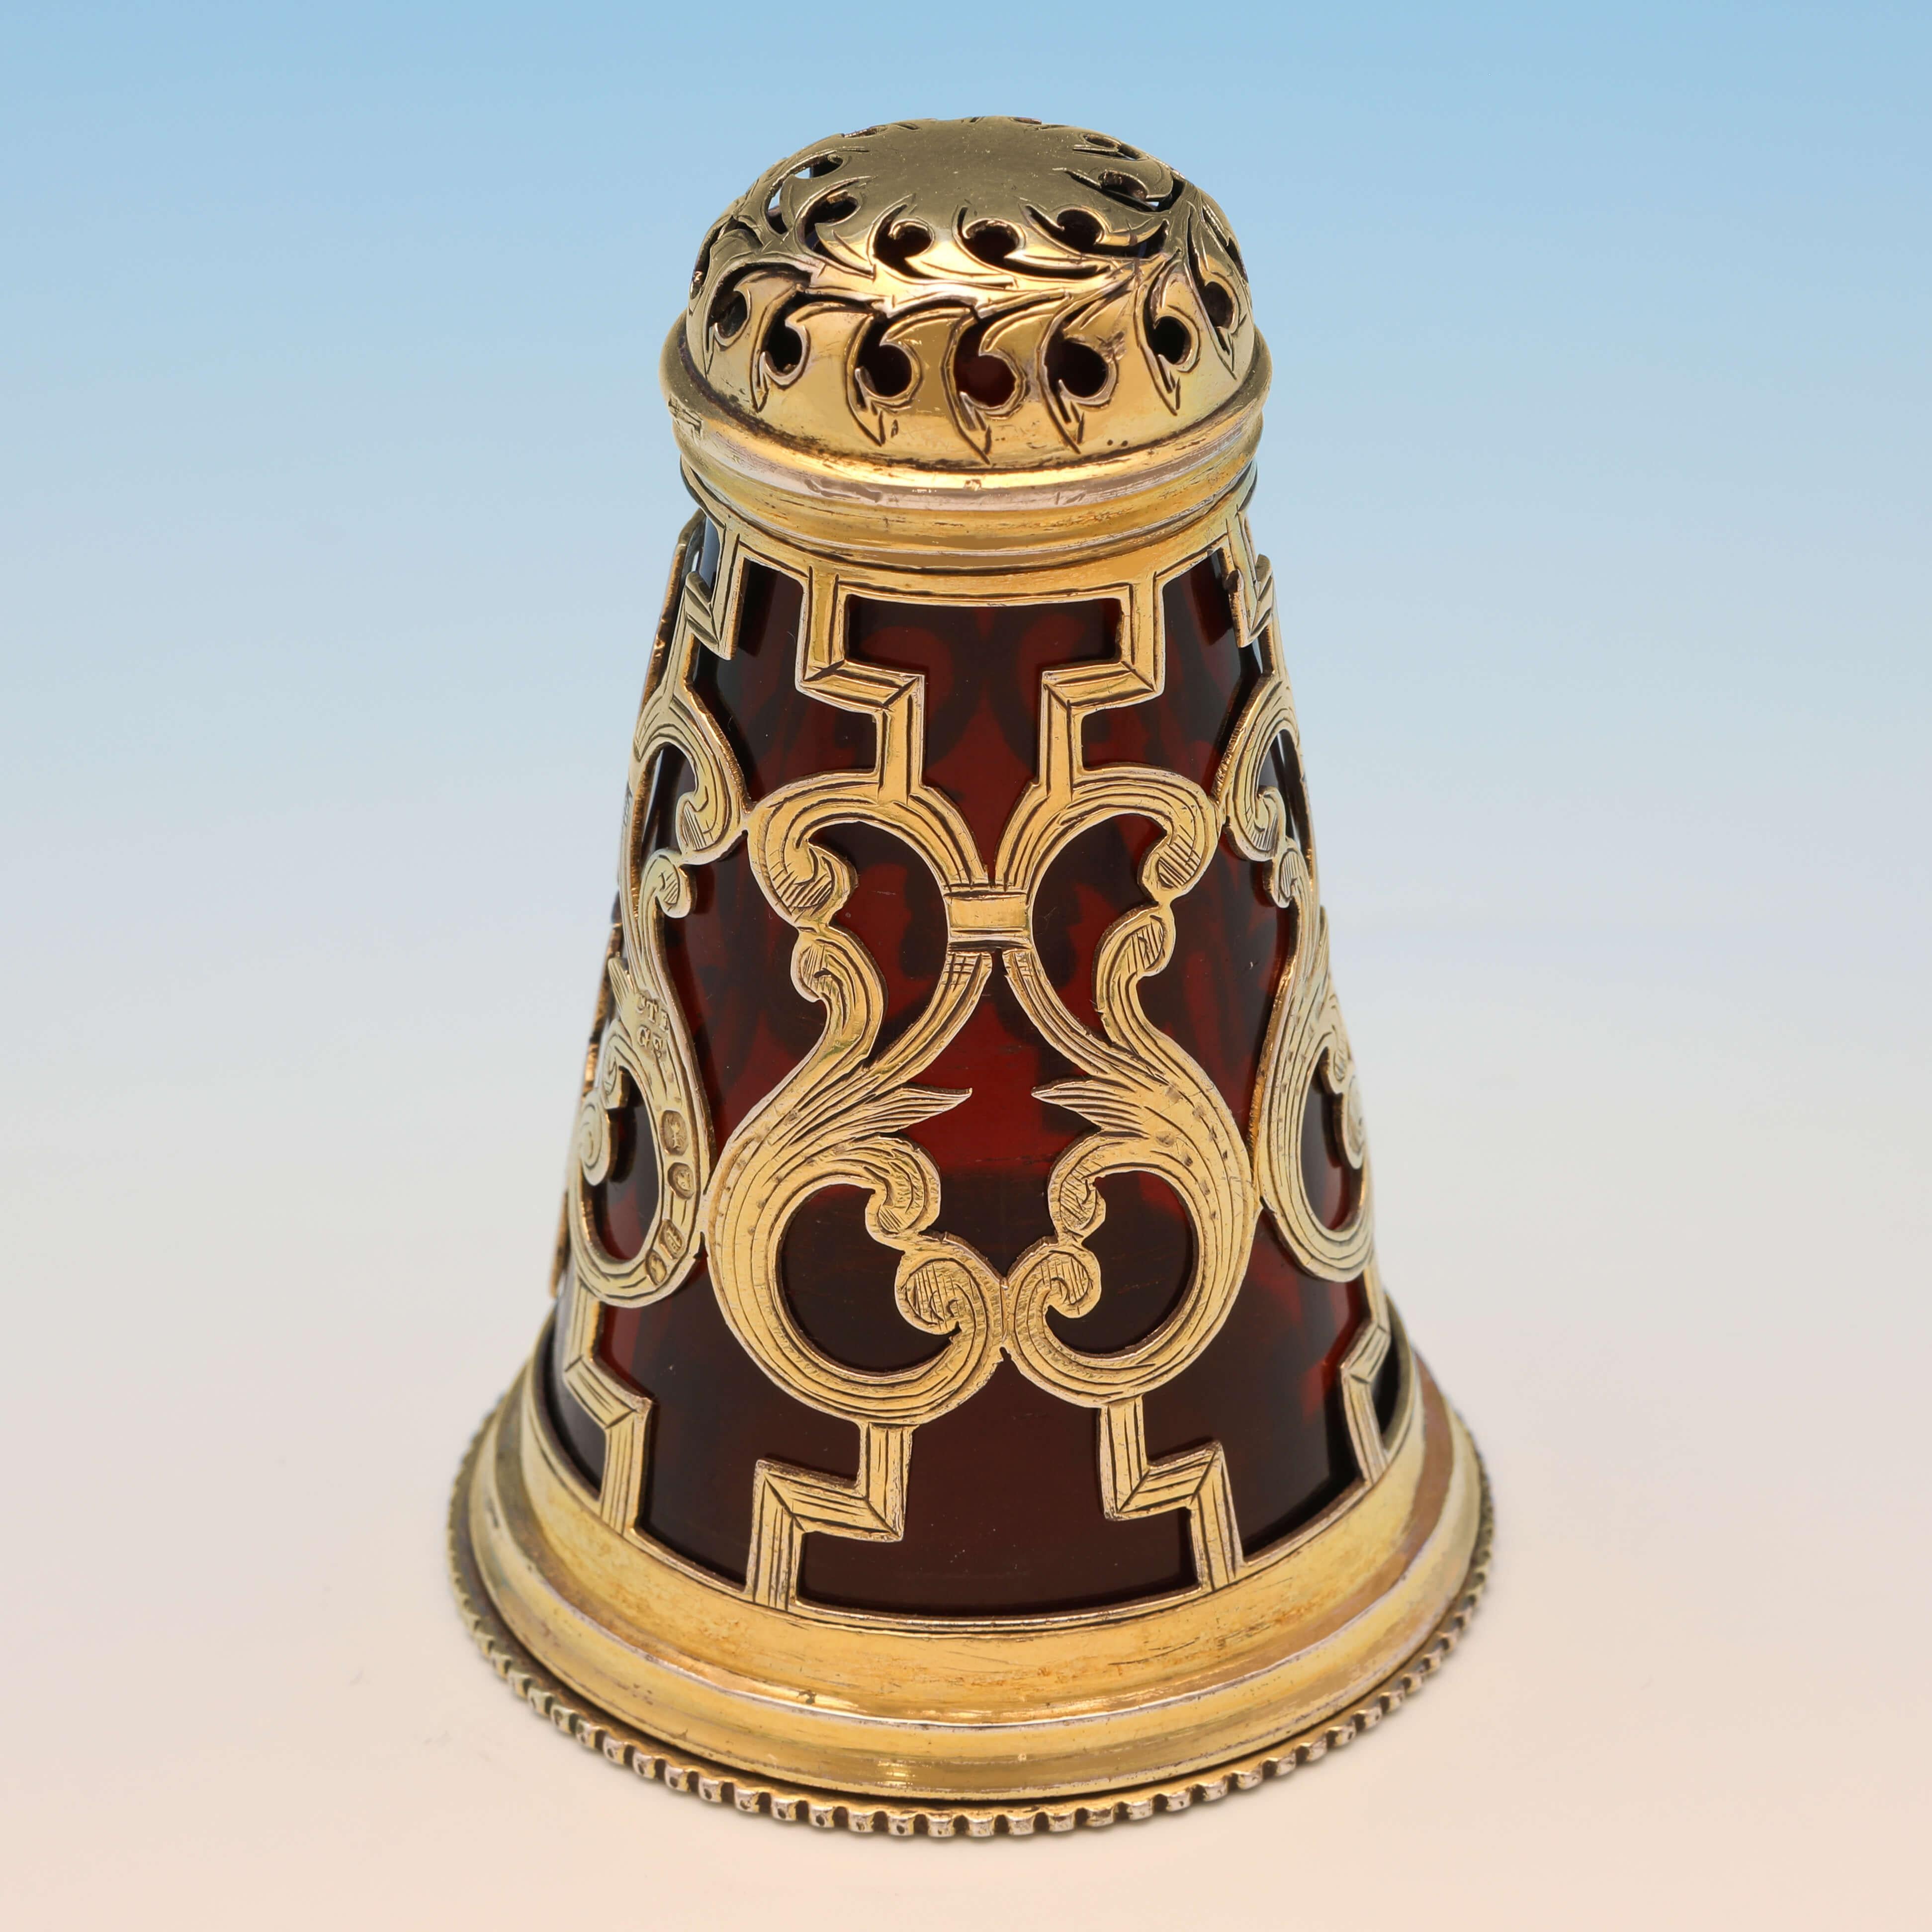 Hallmarked in London in 1850 by Charles & George Fox, this striking, Victorian, antique sterling silver pepper pot, features the original gilding and ruby glass liner, and a pieced and engraved body. The pepper pot measures 2.75